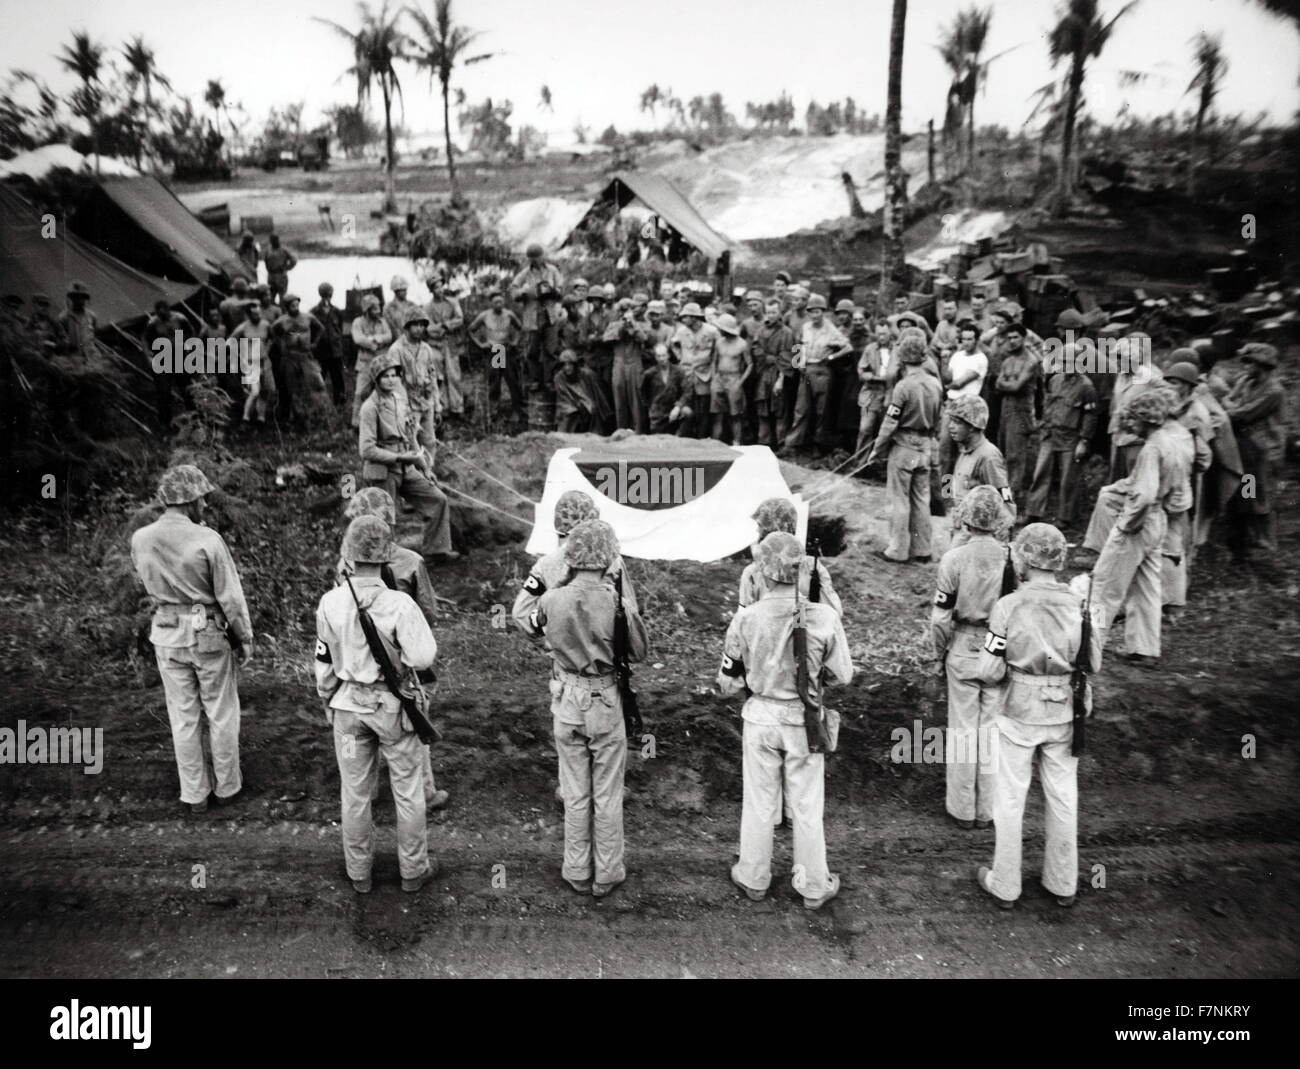 World War two: The funeral of Japanese general Yoshitsugu Sait?, Saipan, 1944. Yoshitsugu Sait? (1890 – 10 July 1944) lieutenant general in the Imperial Japanese Army during World War II. In April 1944, Sait? was appointed commander of the IJA 43rd Division at the time of its deployment to Saipan. Sait?, wounded by shrapnel, committed ritual suicide in a cave at dawn on 10 July, with his adjutant shooting him in the head after he had disembowelled himself. Stock Photo